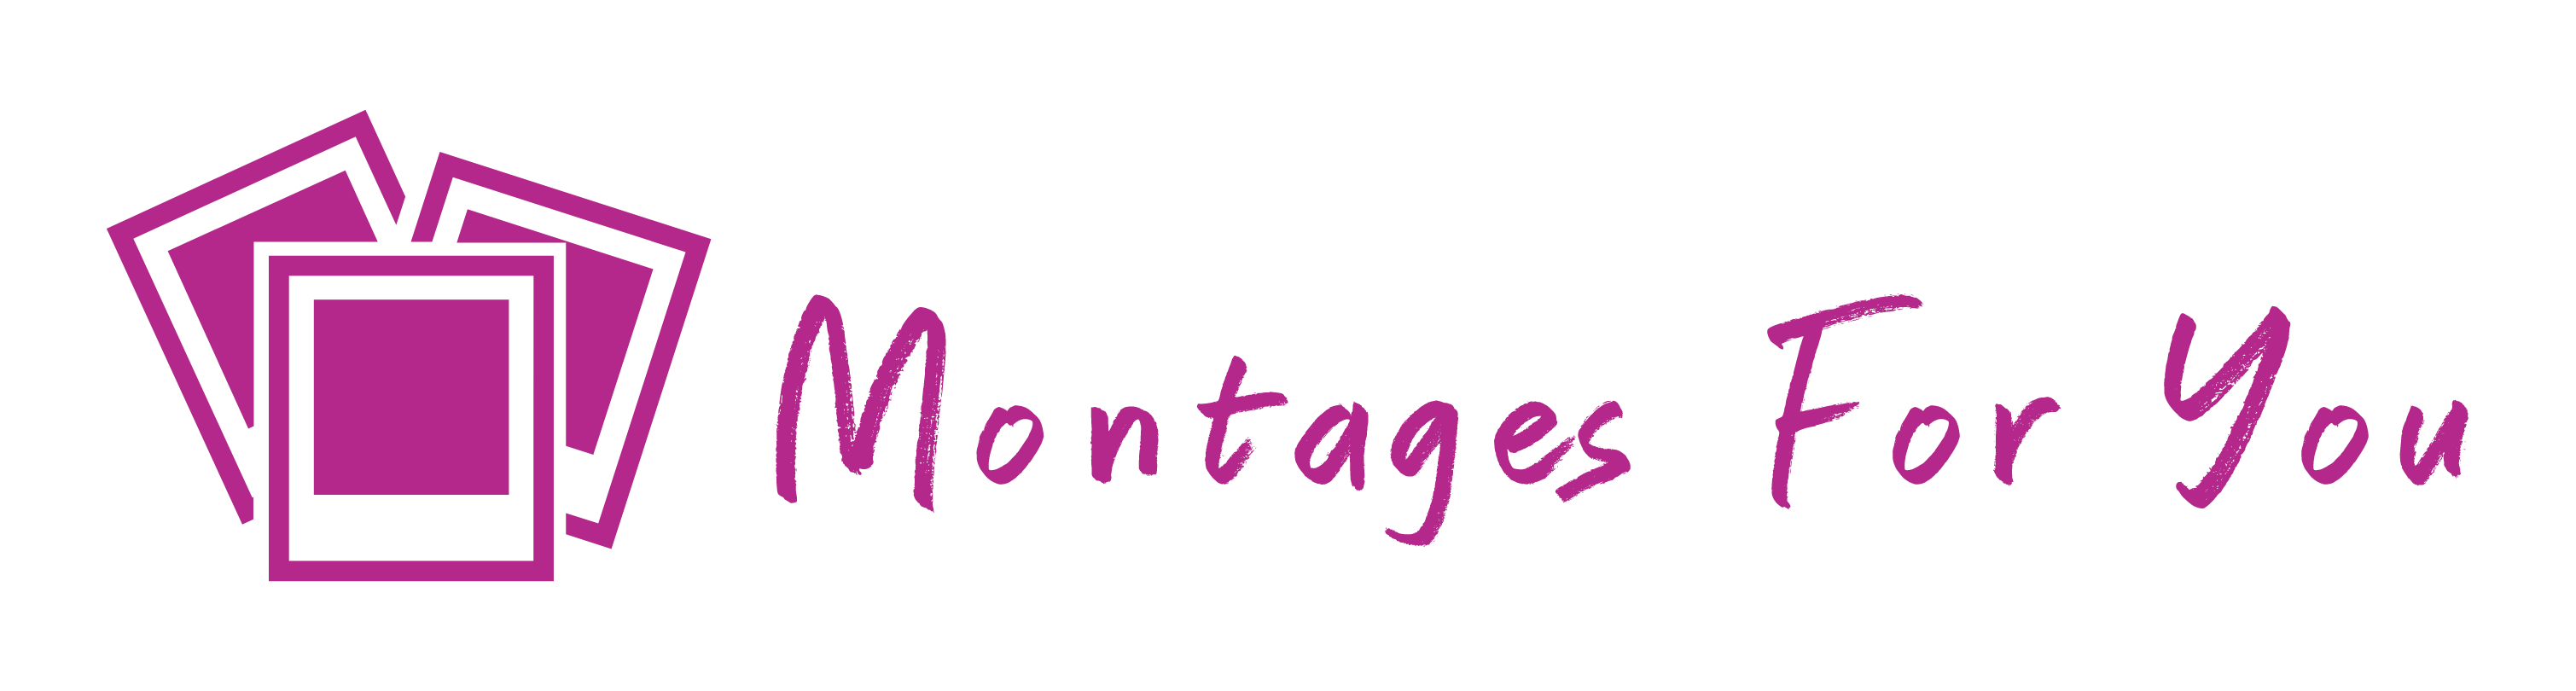 An interview with Rebecca Grossman of Montages For You about affordable, custom montages for your Bar or Bat Mitzvah celebration.